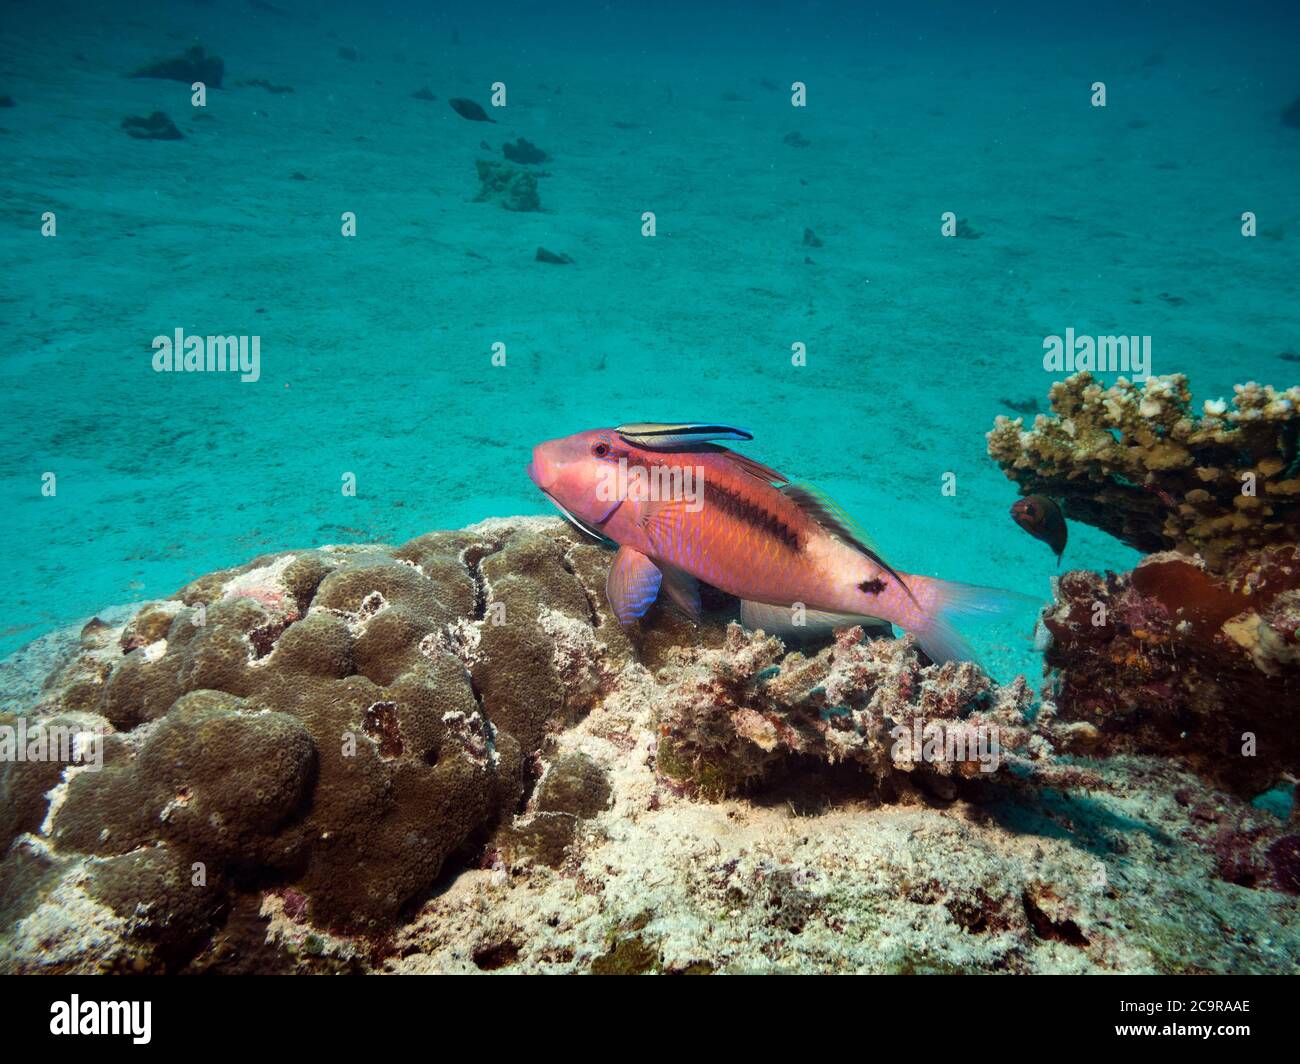 Dash-and-dot goatfish, Parupeneus barberinus, on reef with a cleaner Wrasse, Labraoides dimidiatus, in Maldives Stock Photo